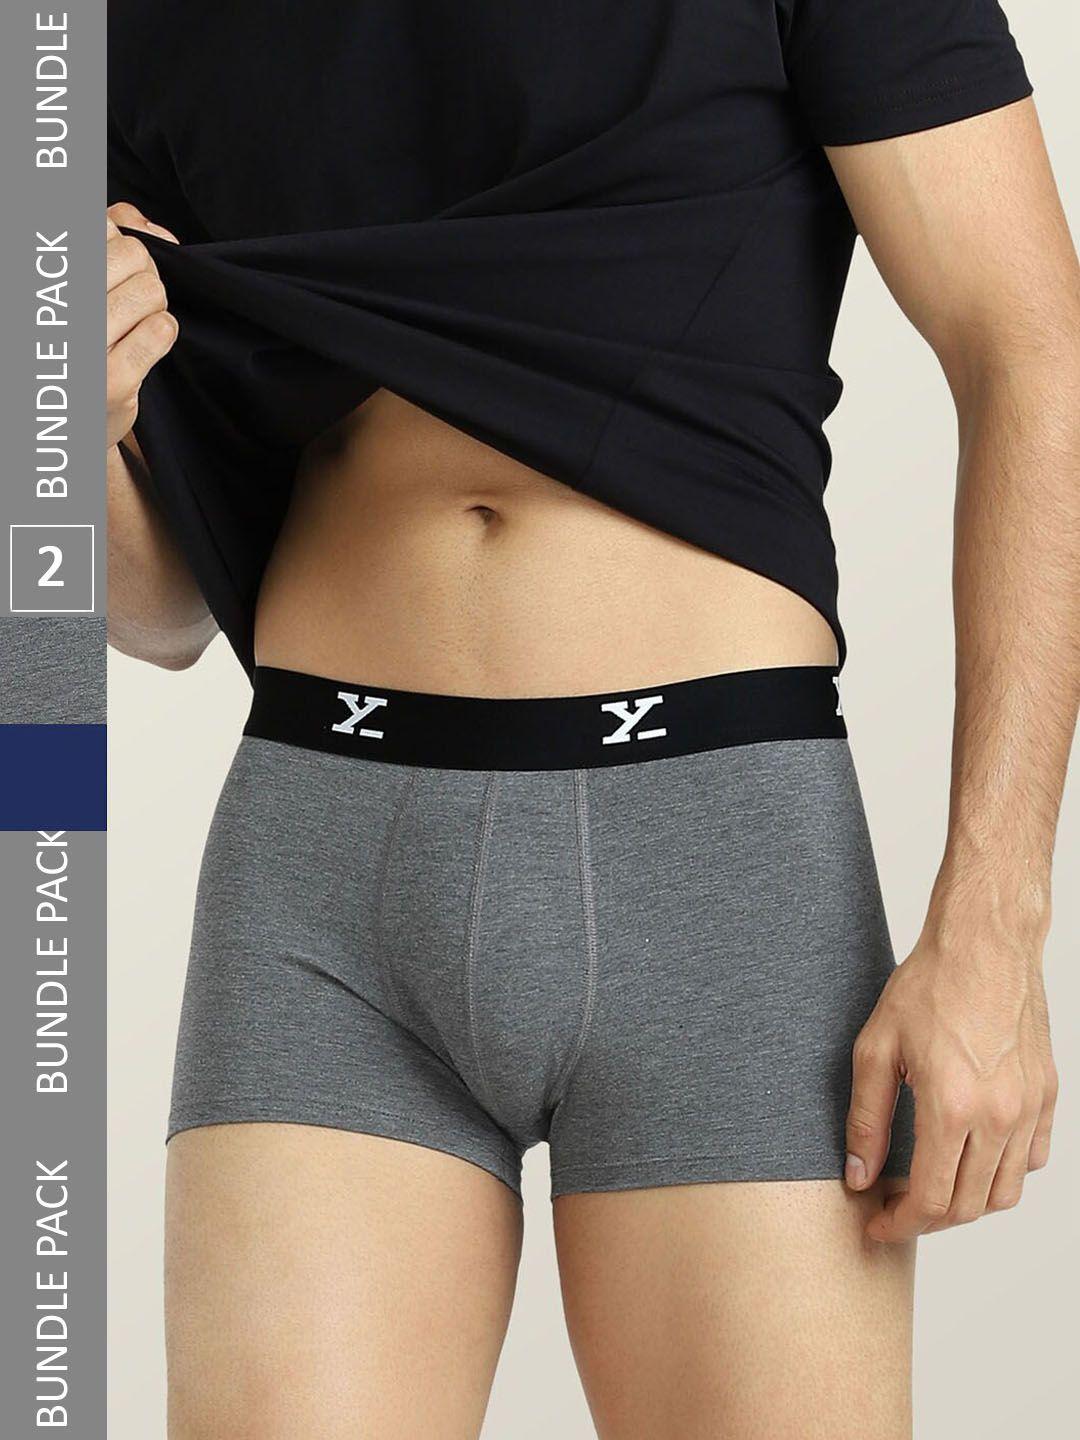 xyxx-pack-of-2-trunks-xytrnk2pckn569